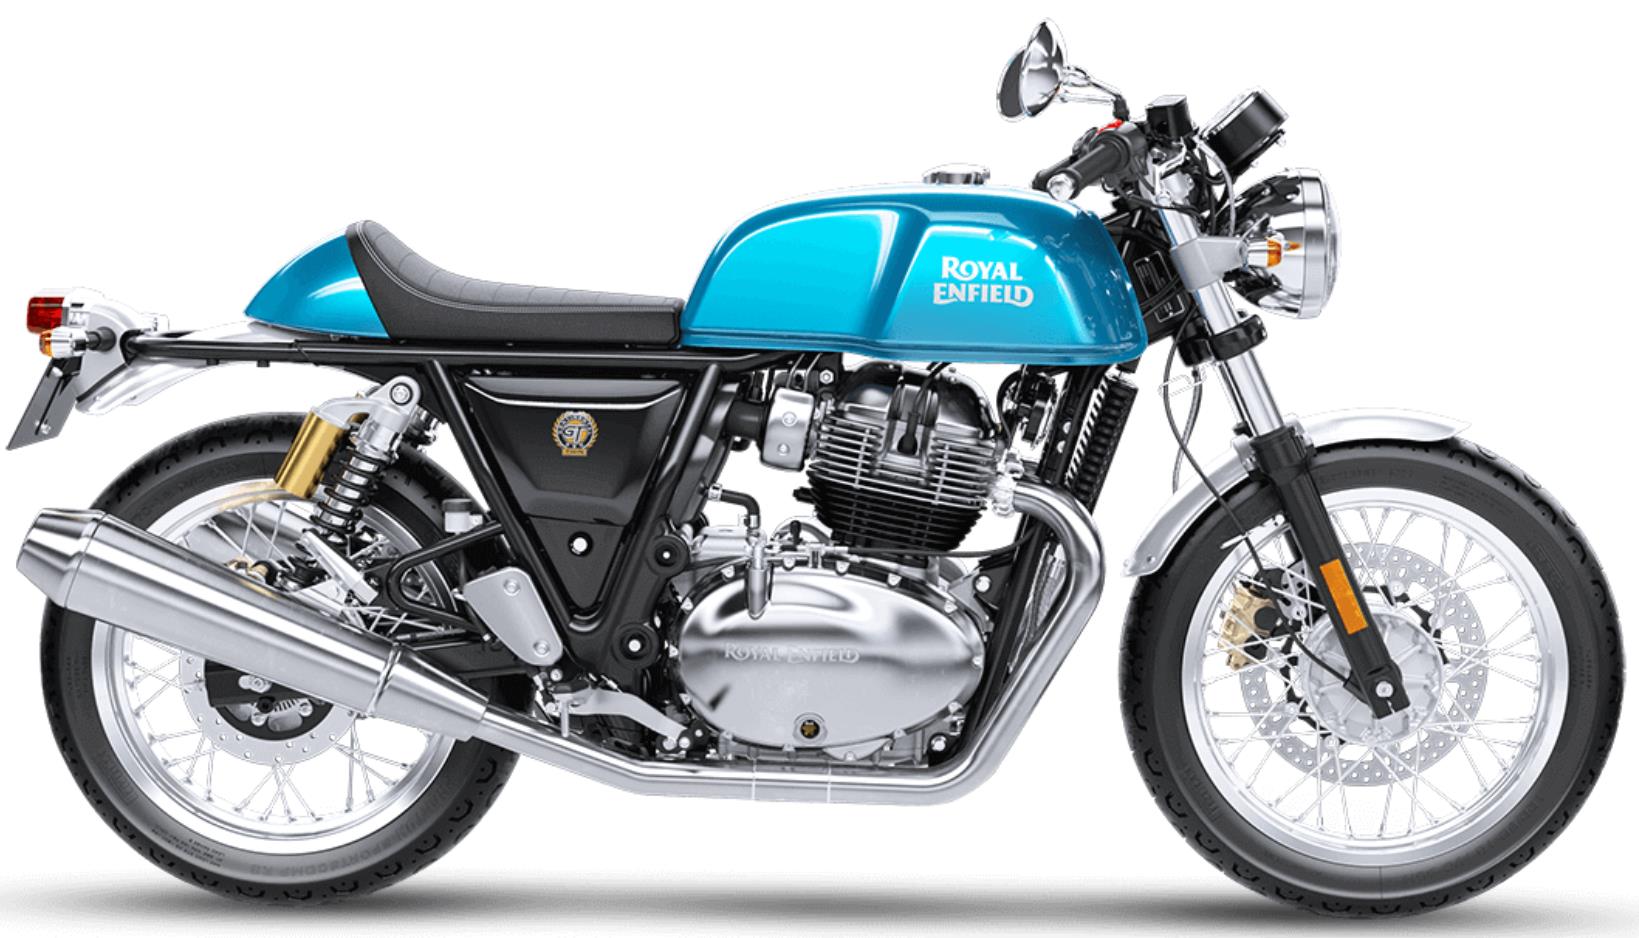 2019 Royal Enfield Continental GT 650 Price in India, Specs & Mileage